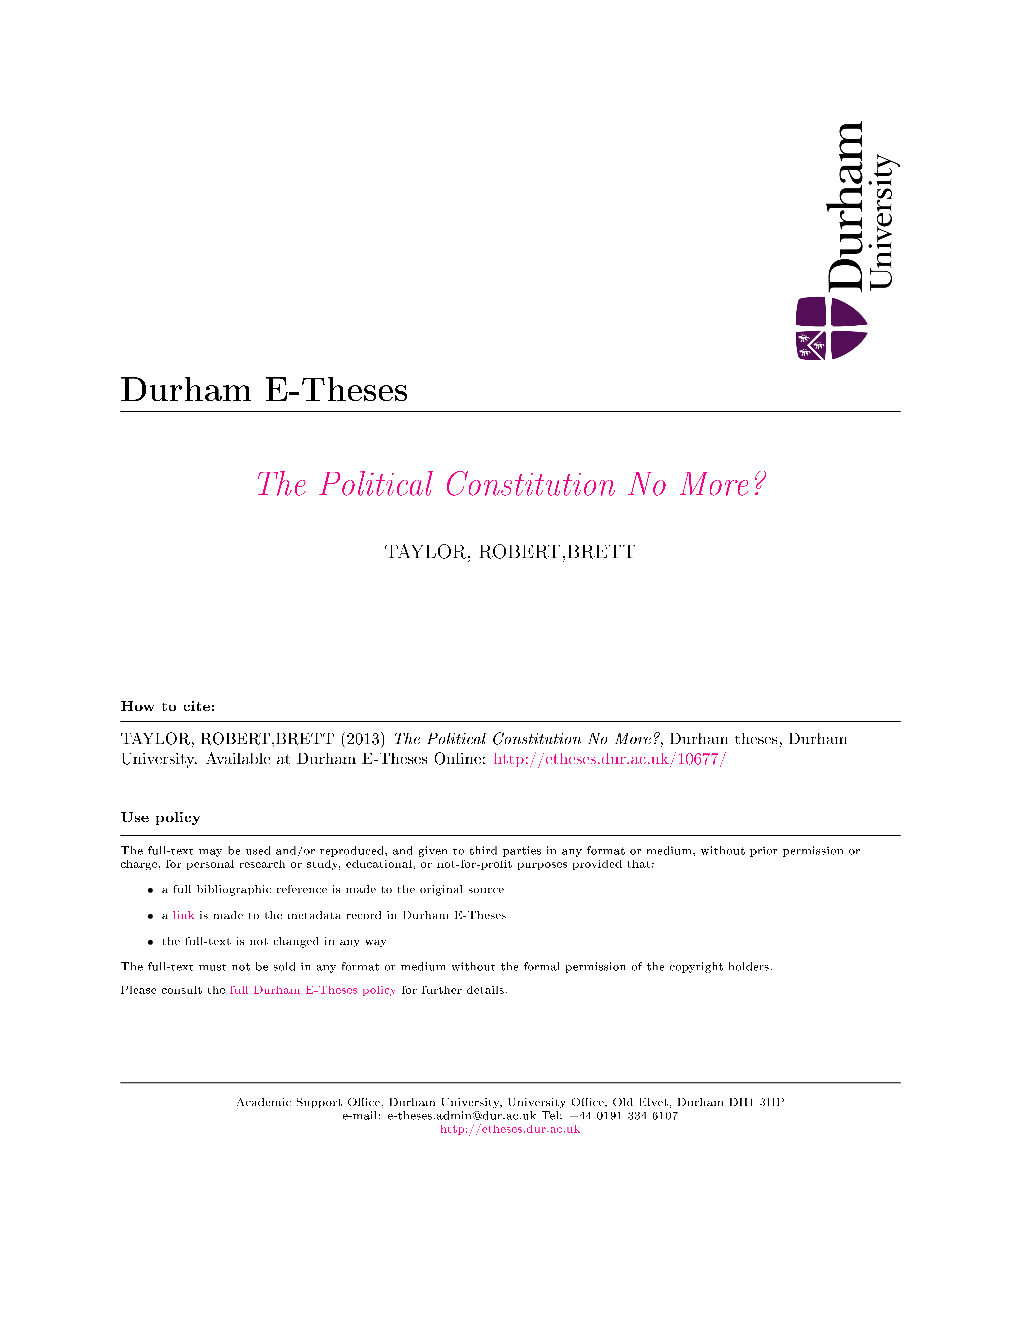 The Political Constitution No More?